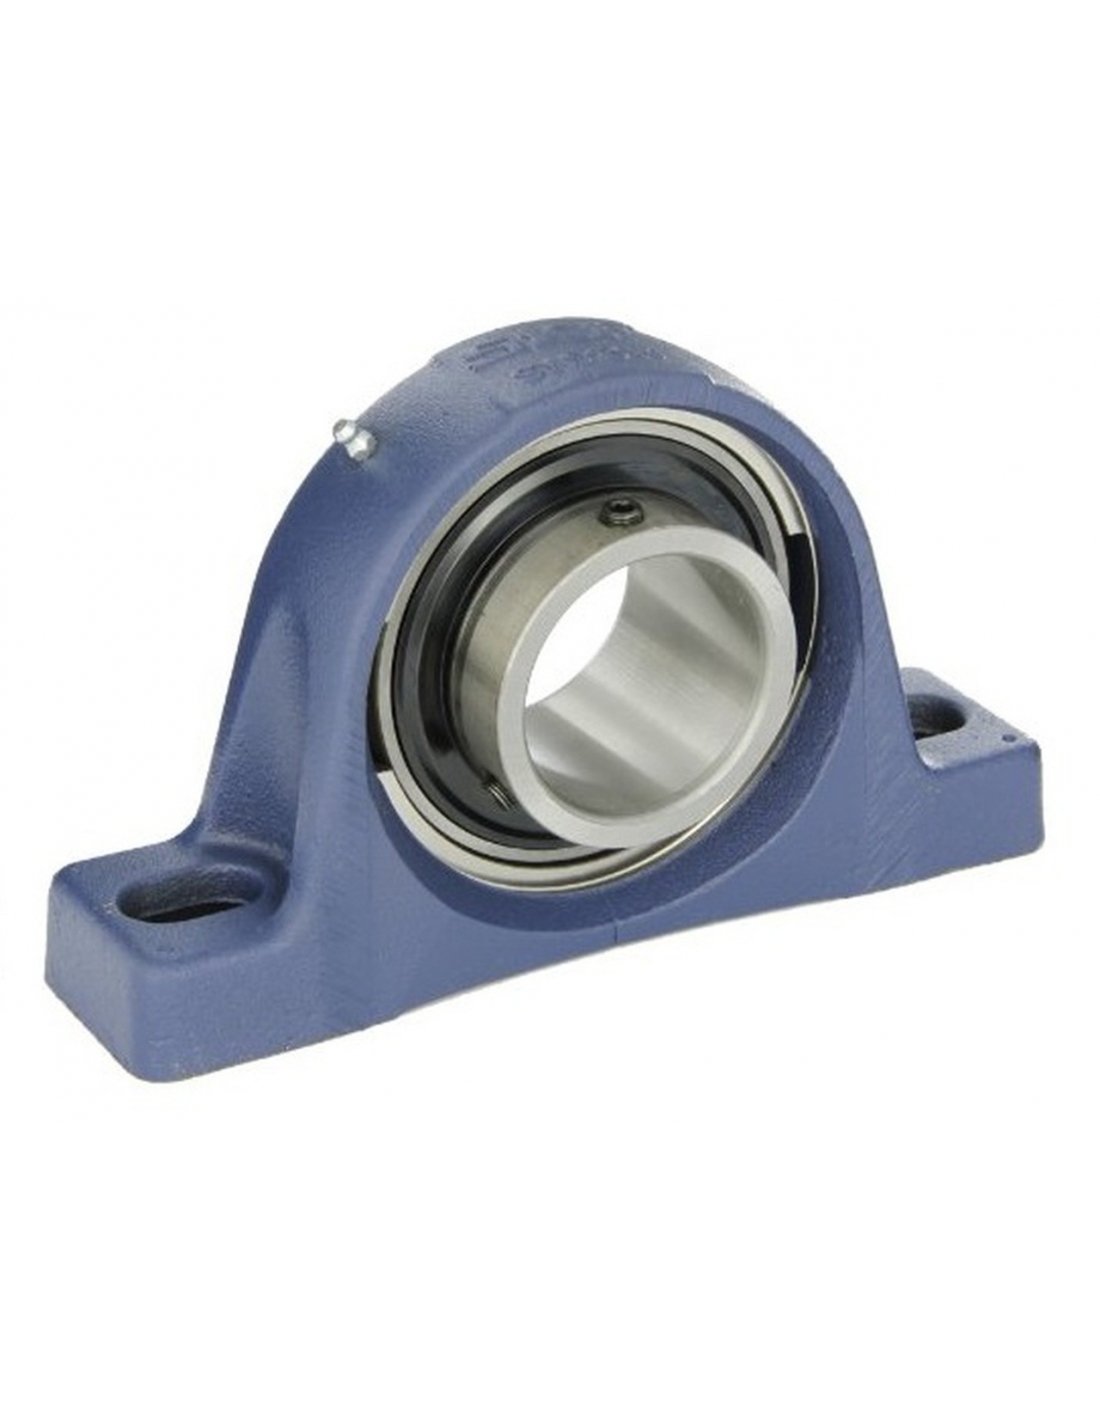 UCP206-18  PREMIUM Normal duty 2 bolt cast iron pillow block self-lube housed unit - Imperial Thumbnail